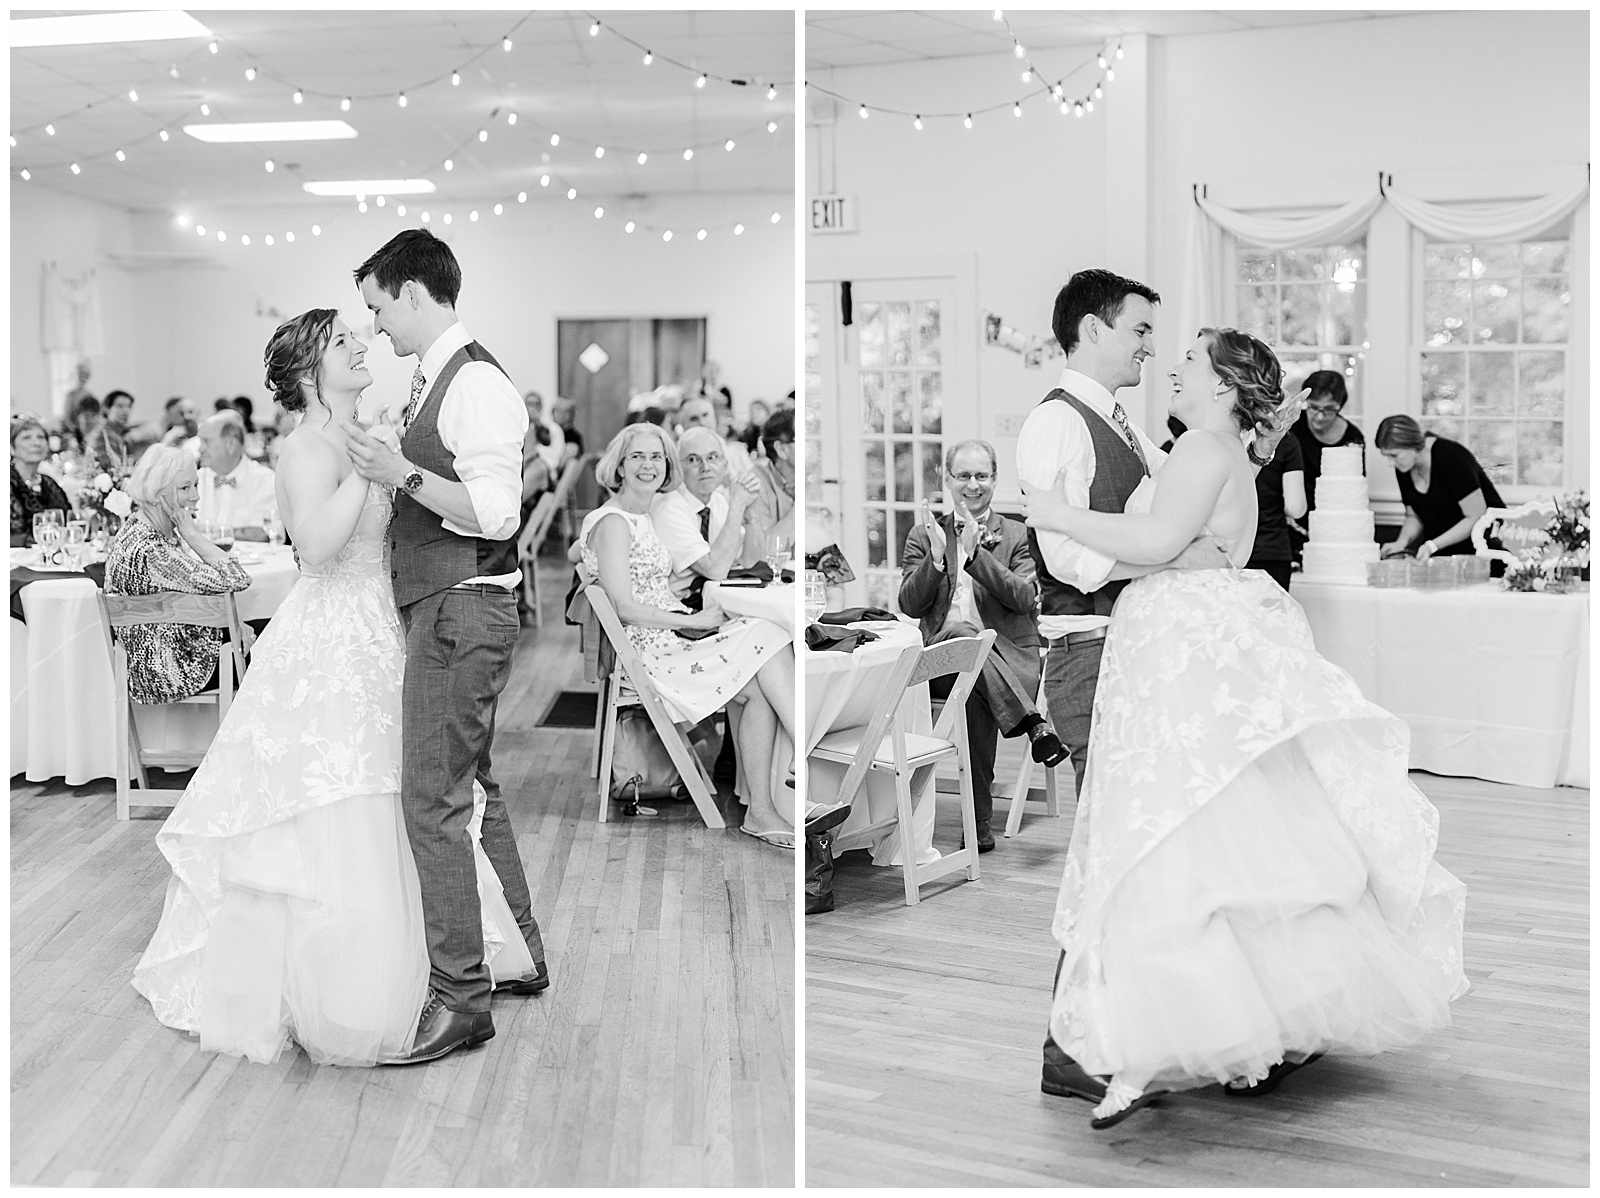 Adorable bride and groom first dance at Outdoorsy Summer Wedding at North Carolina Lakehouse in the Mountains | check out the full wedding at KevynDixonPhoto.com